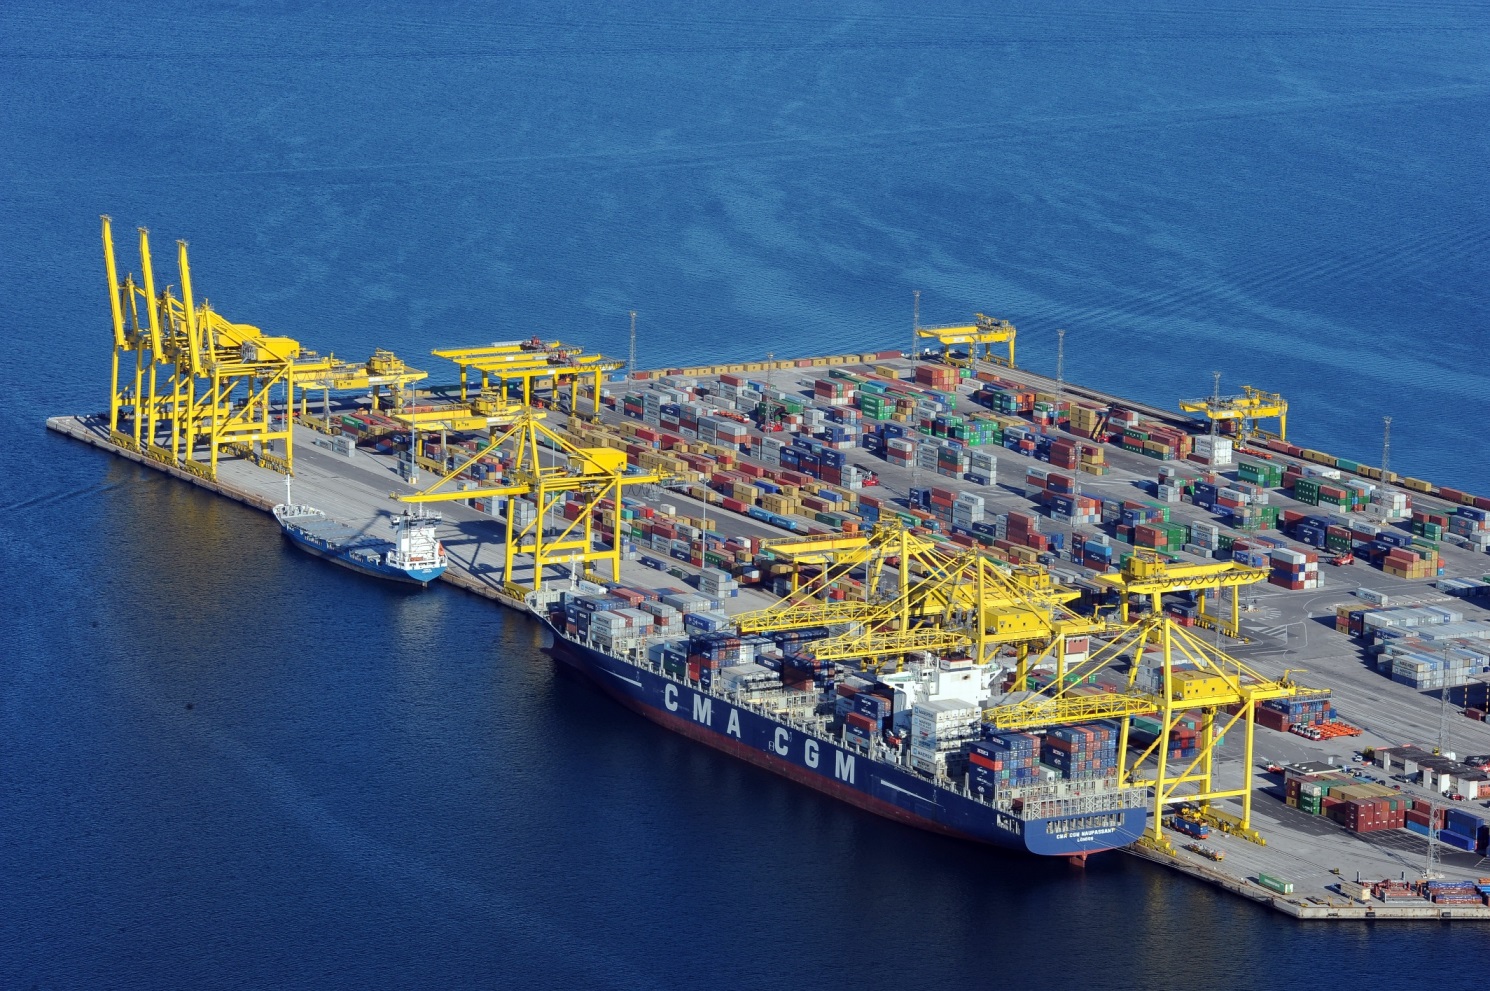 Port of Trieste records strong increase in container handling volume